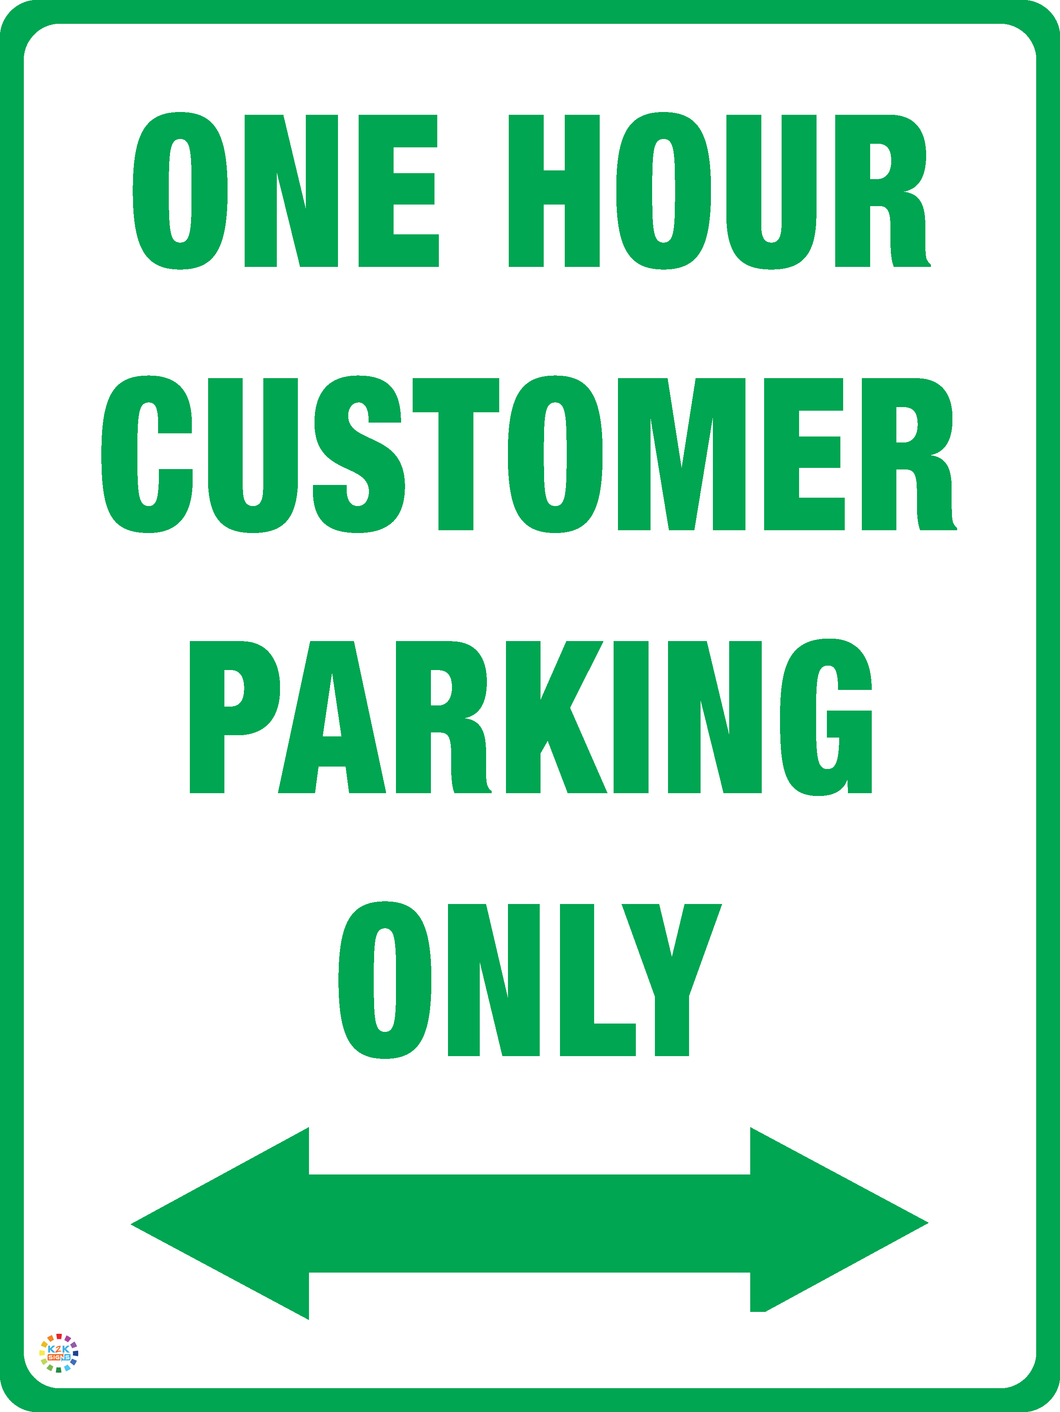 One Hour Customer Parking Only (Two Way Arrow) Sign